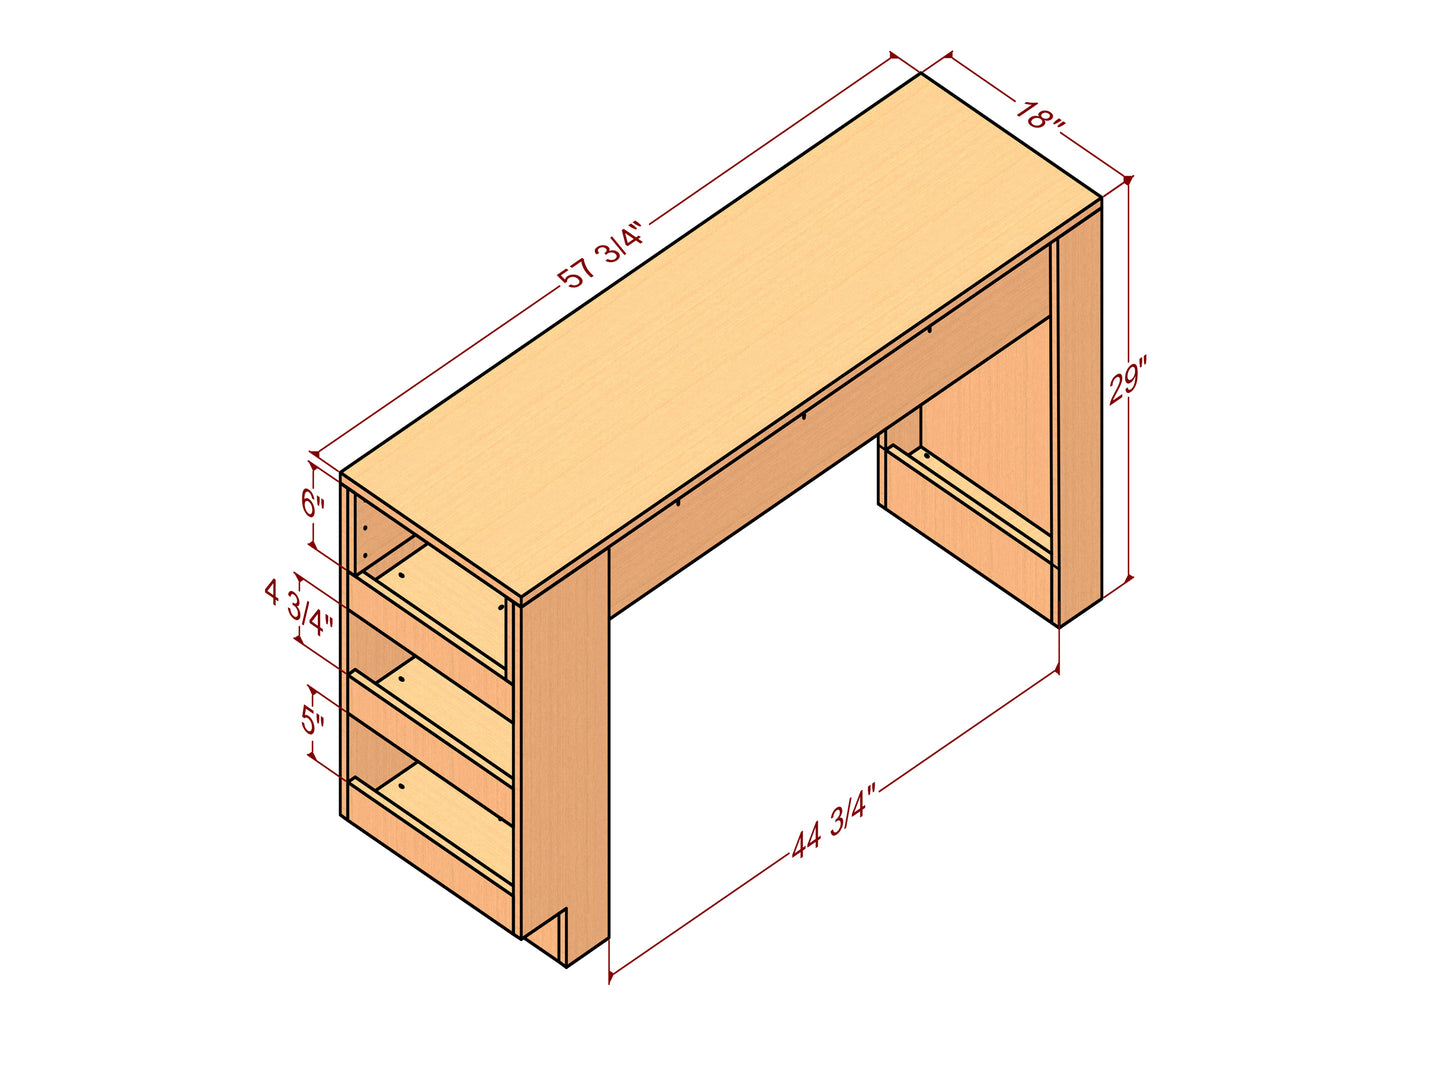 Maximize Bed Space & Fun! DIY Full-Size Bunk Bed with Storage, Desk & Drawers (Woodworking Plan)